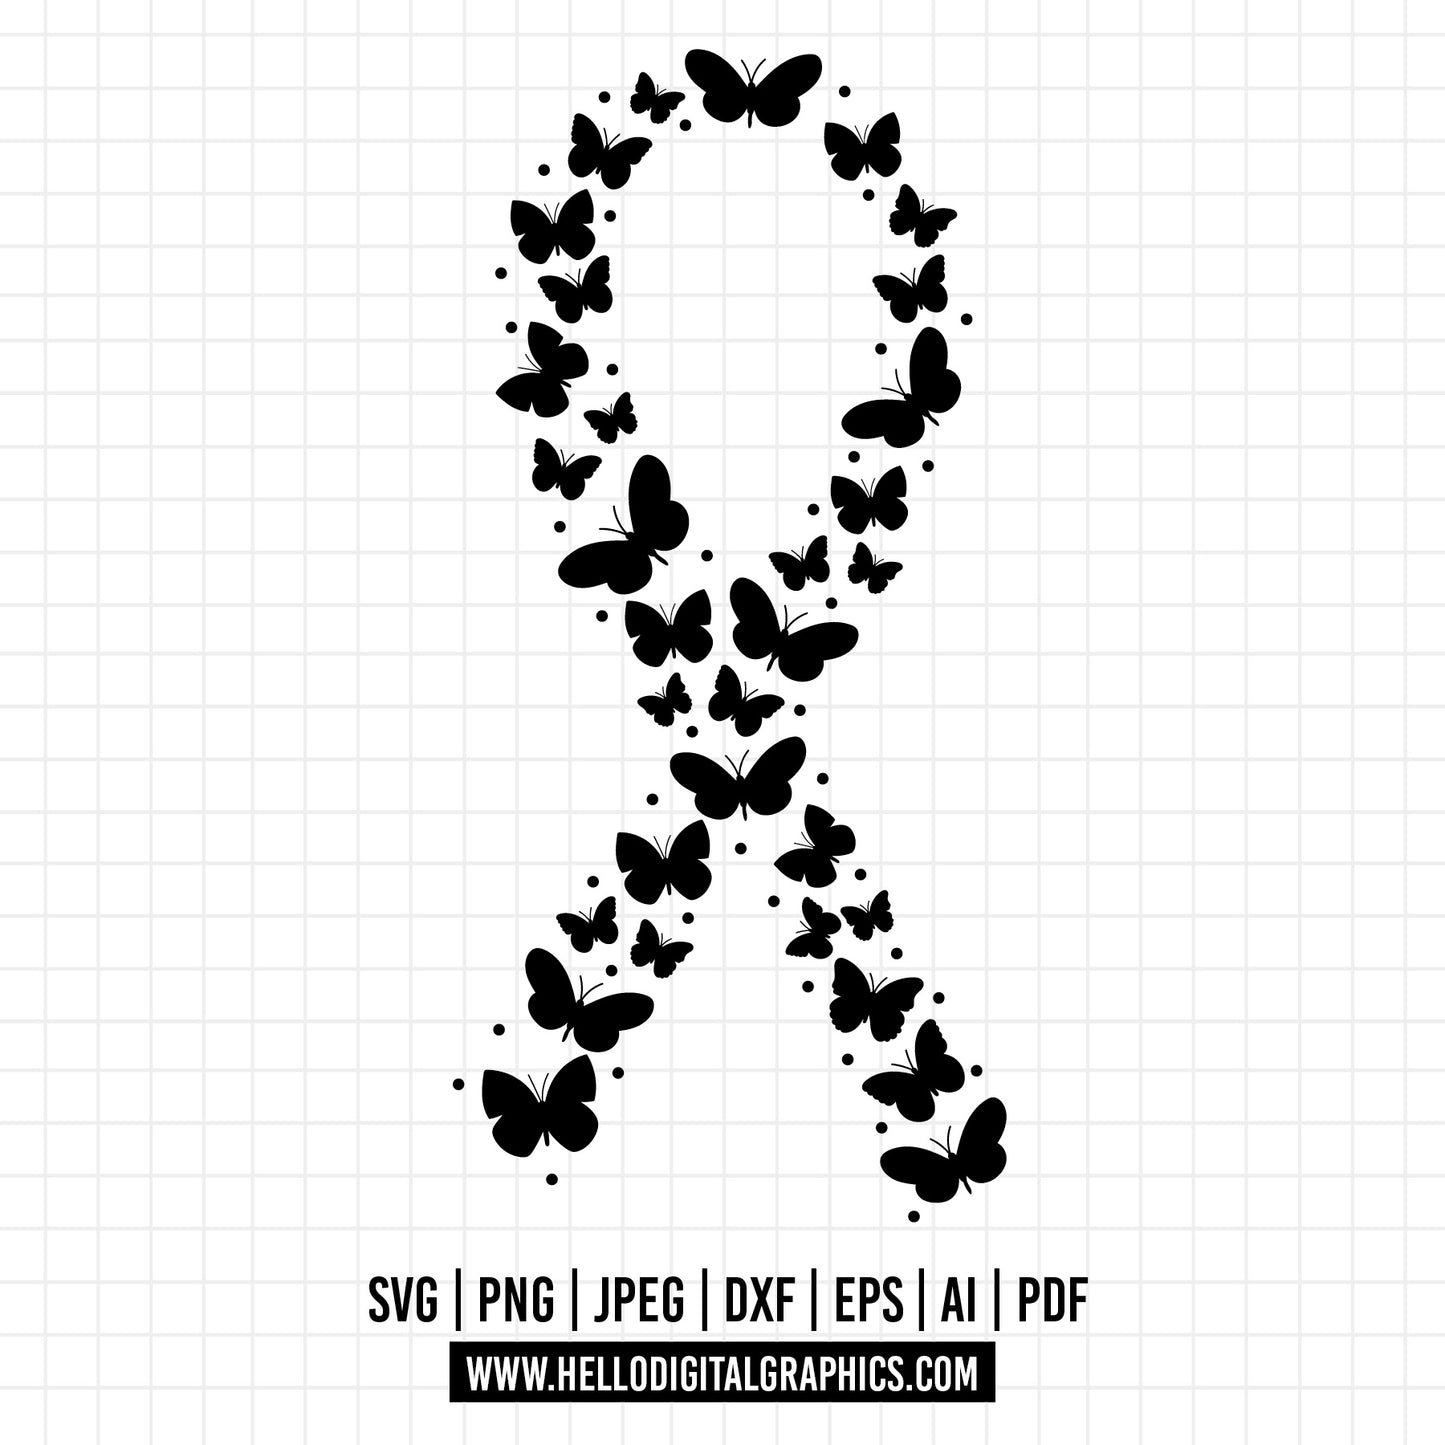 COD1163 Her fight is our fight svg, Breast Cancer Awareness Rainbow SVG, Cancer SVG, Rainbow svg, Cut Files for Cricut